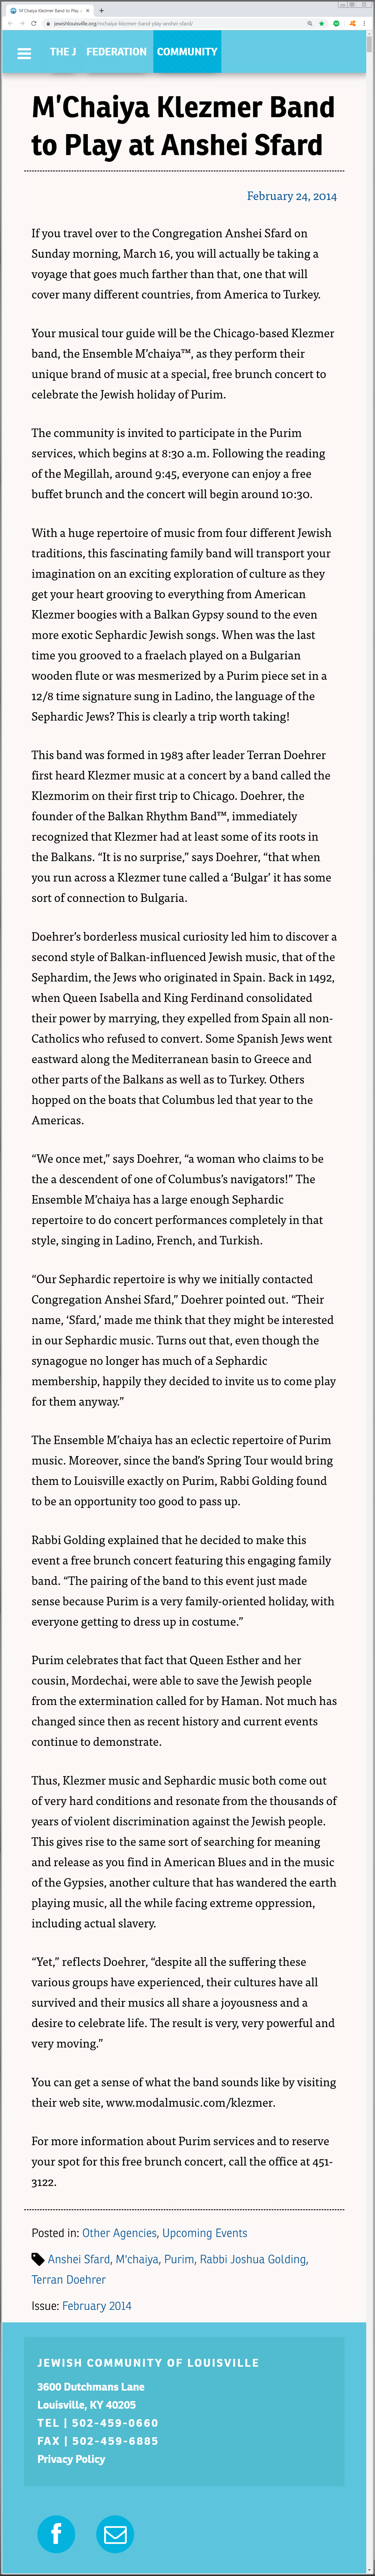 Article on the Louisville, Kentucky Jewish Federation’s February 14, 2014 Jewish Community News web page about the Ensemble M’chaiya (tm).